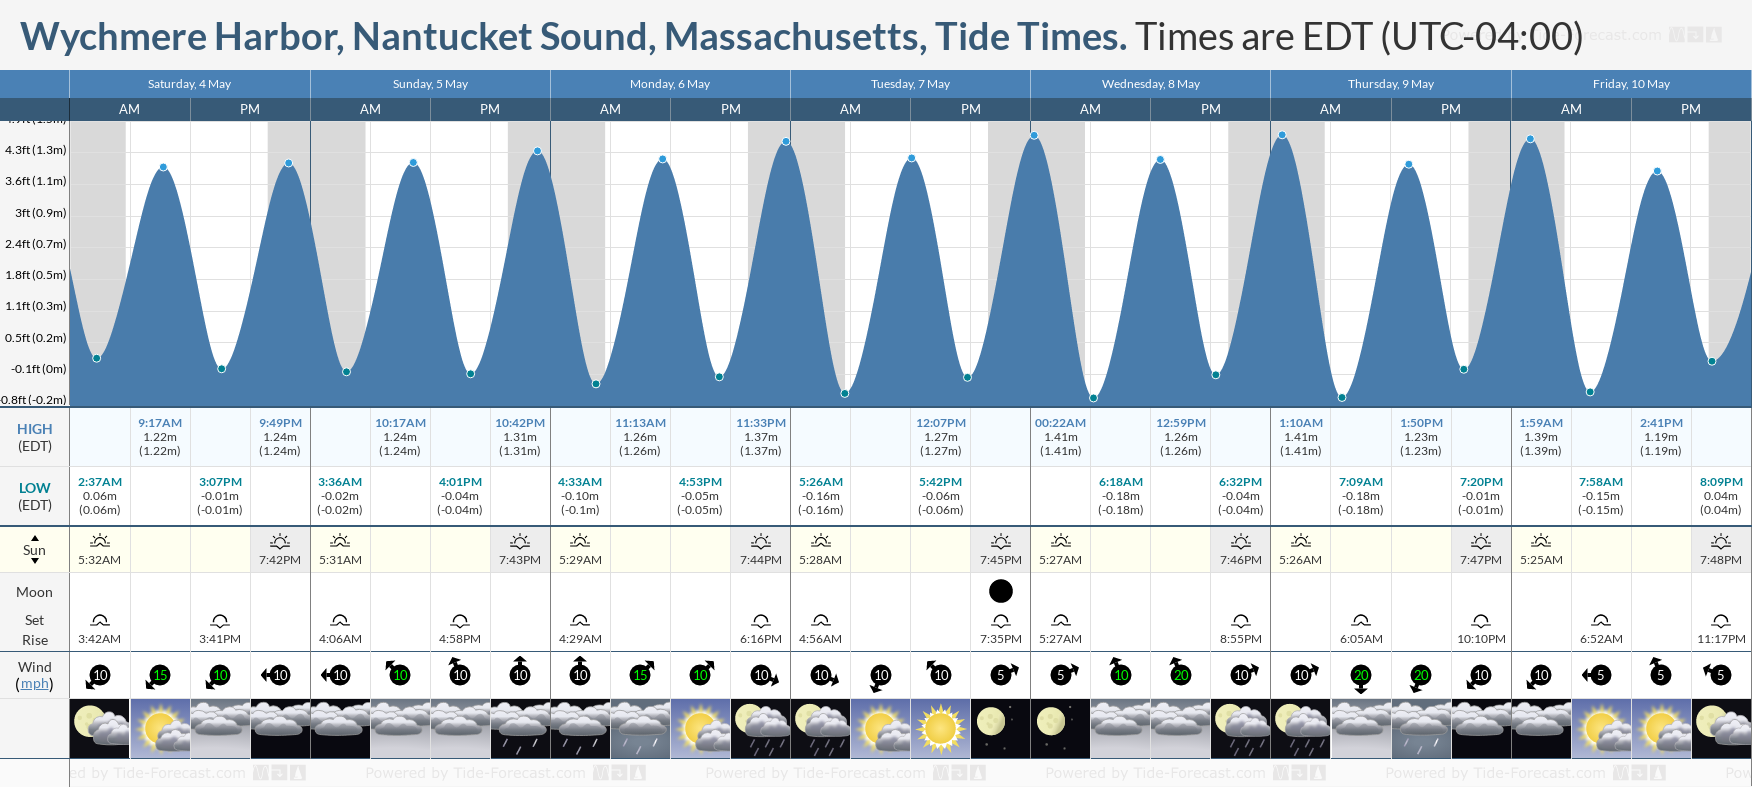 Wychmere Harbor, Nantucket Sound, Massachusetts Tide Chart including high and low tide tide times for the next 7 days